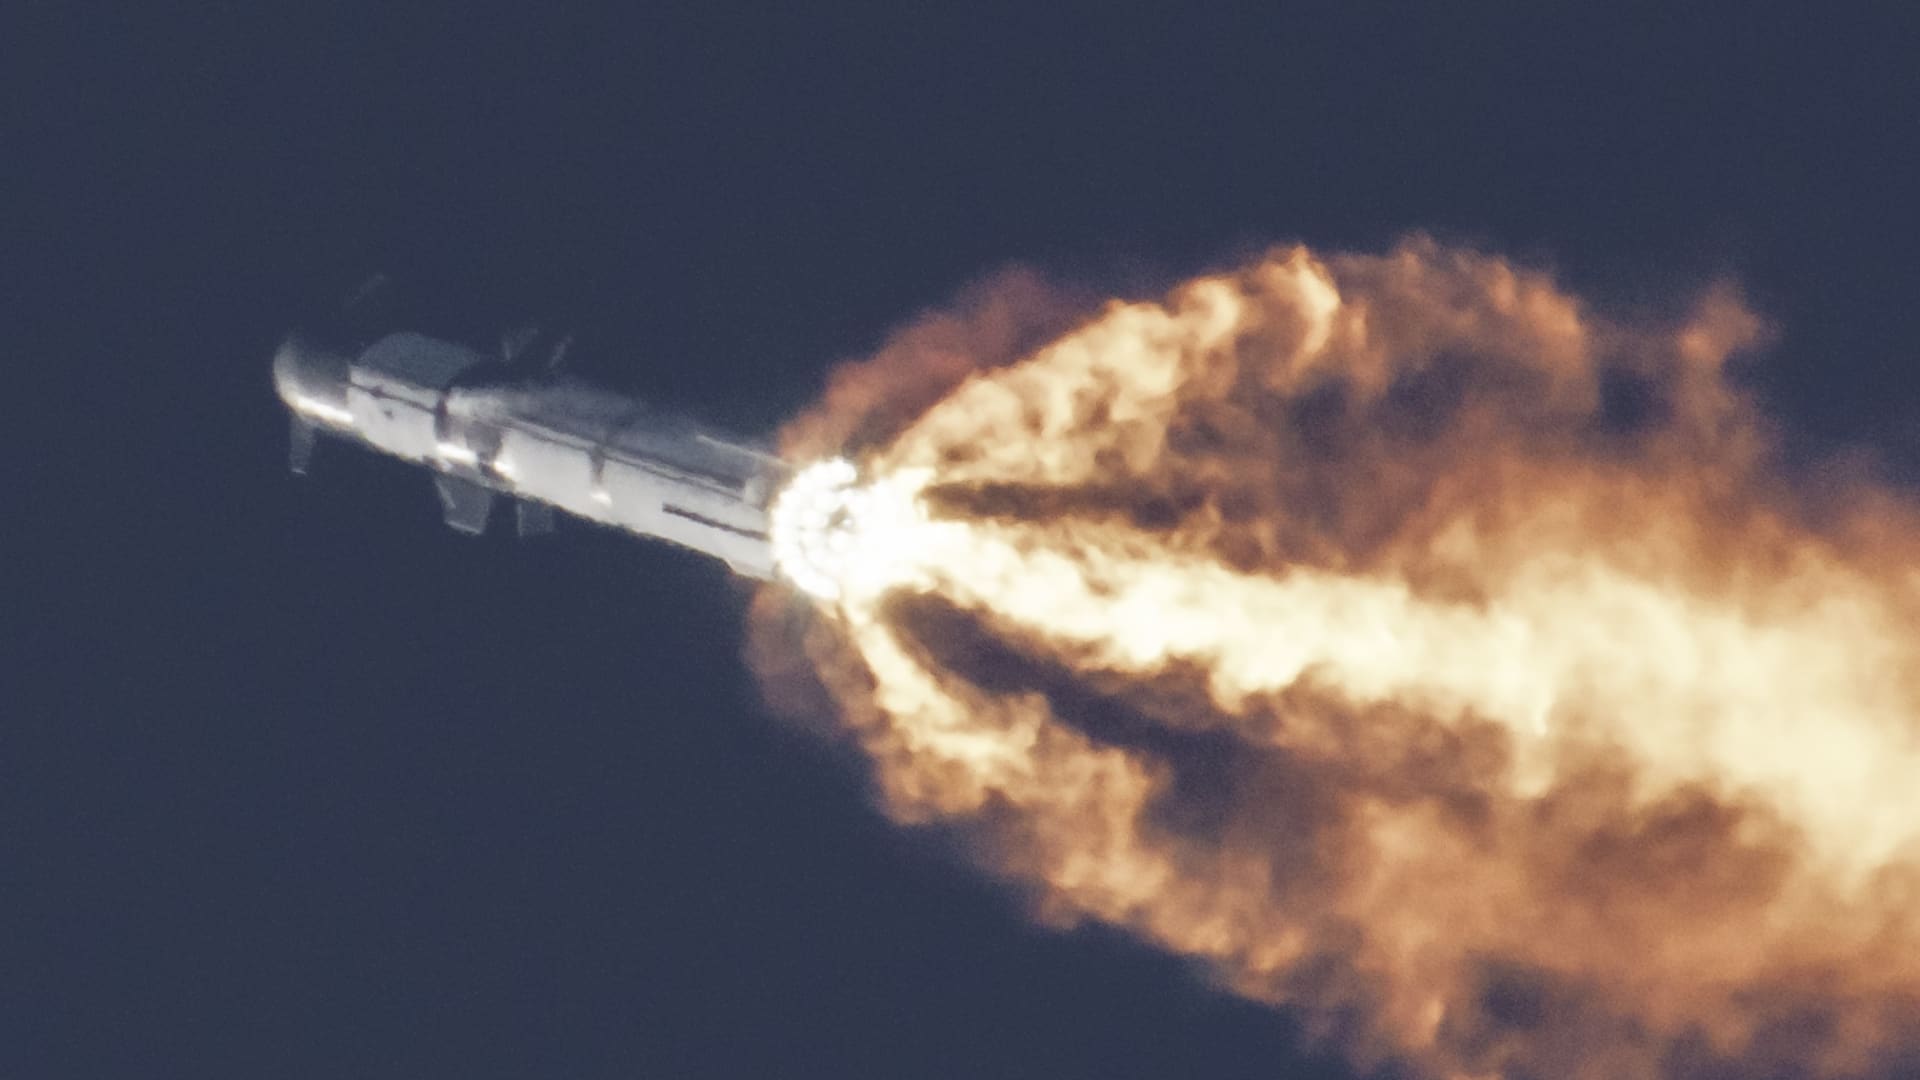 What’s subsequent for SpaceX’s Starship after a dramatic first birth